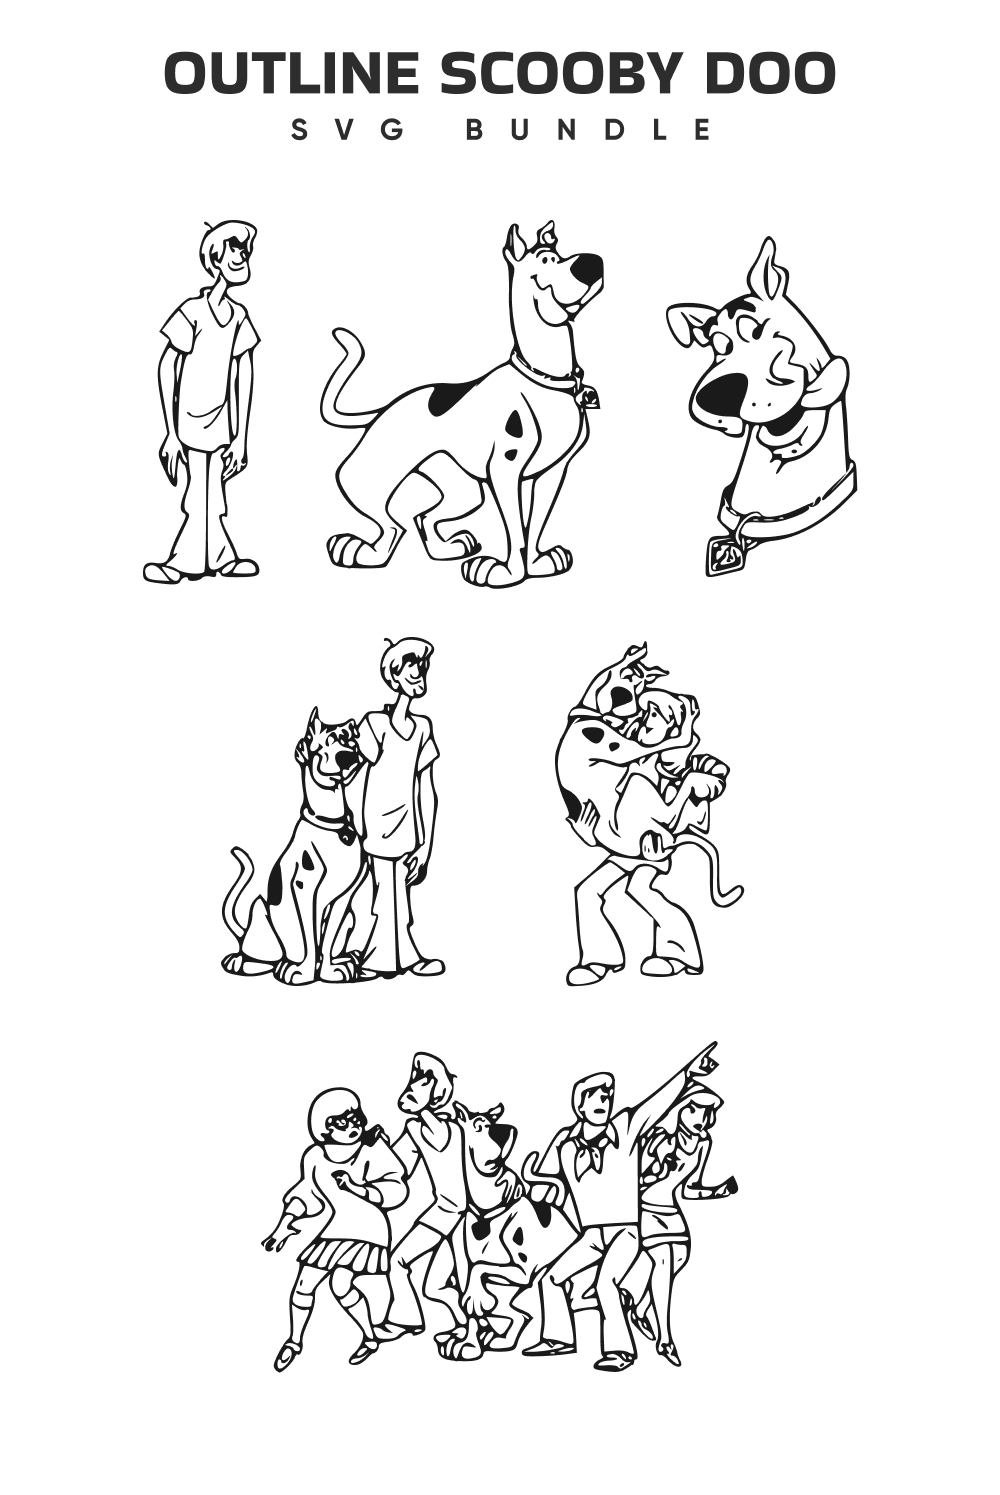 Outline scooby doo characters collection.